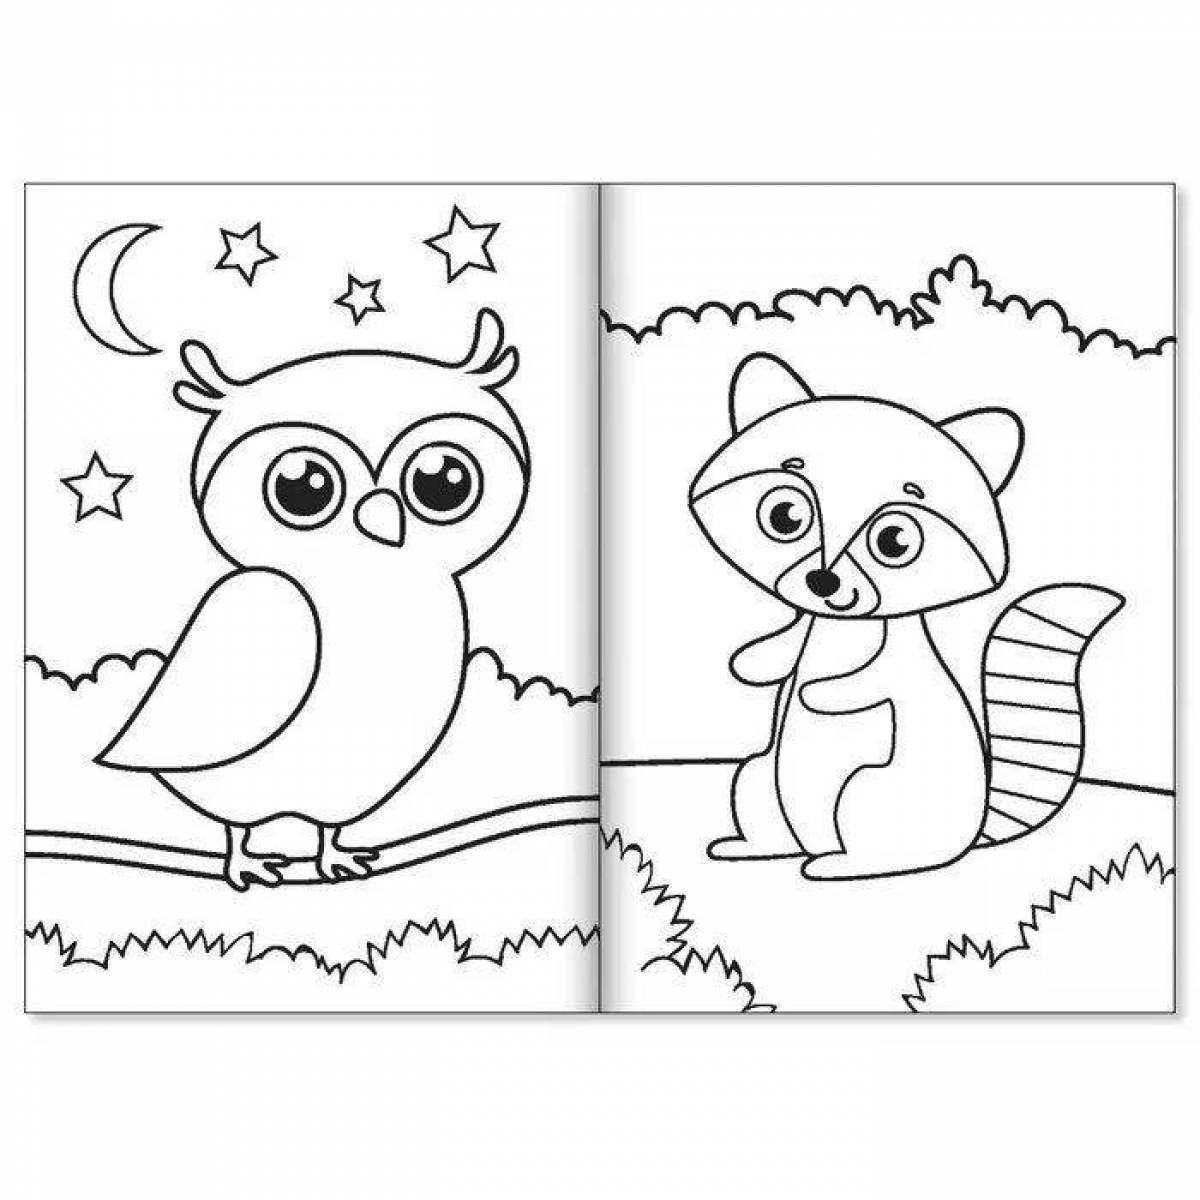 Great a5 coloring book for kids